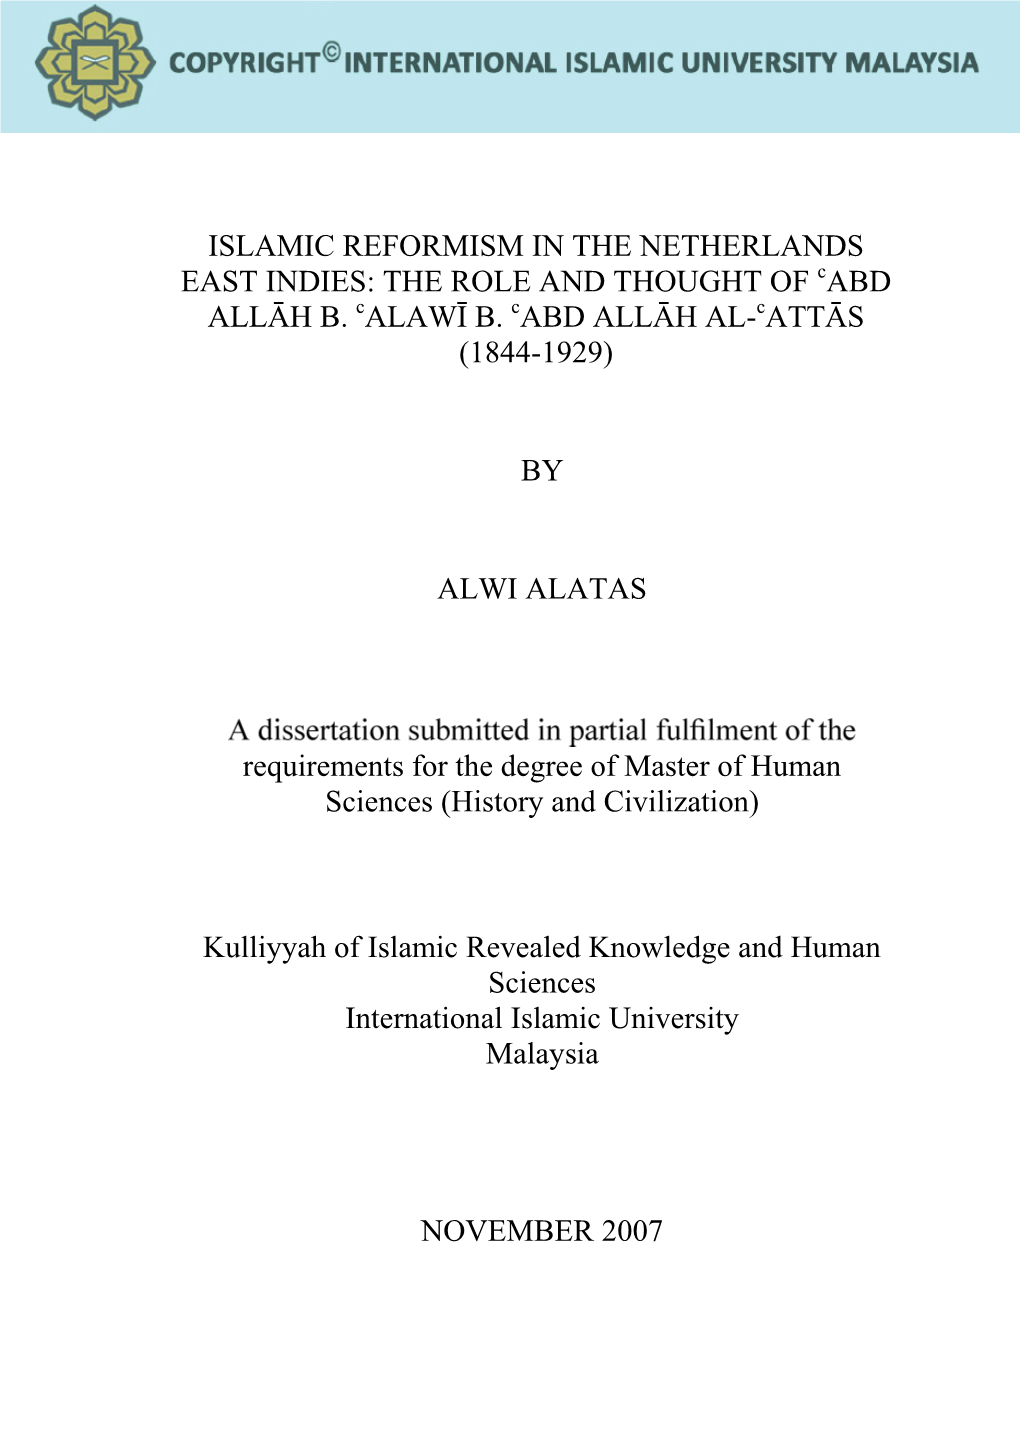 ISLAMIC REFORMISM in the NETHERLANDS EAST INDIES: the ROLE and THOUGHT of Cabd ALLĀH B